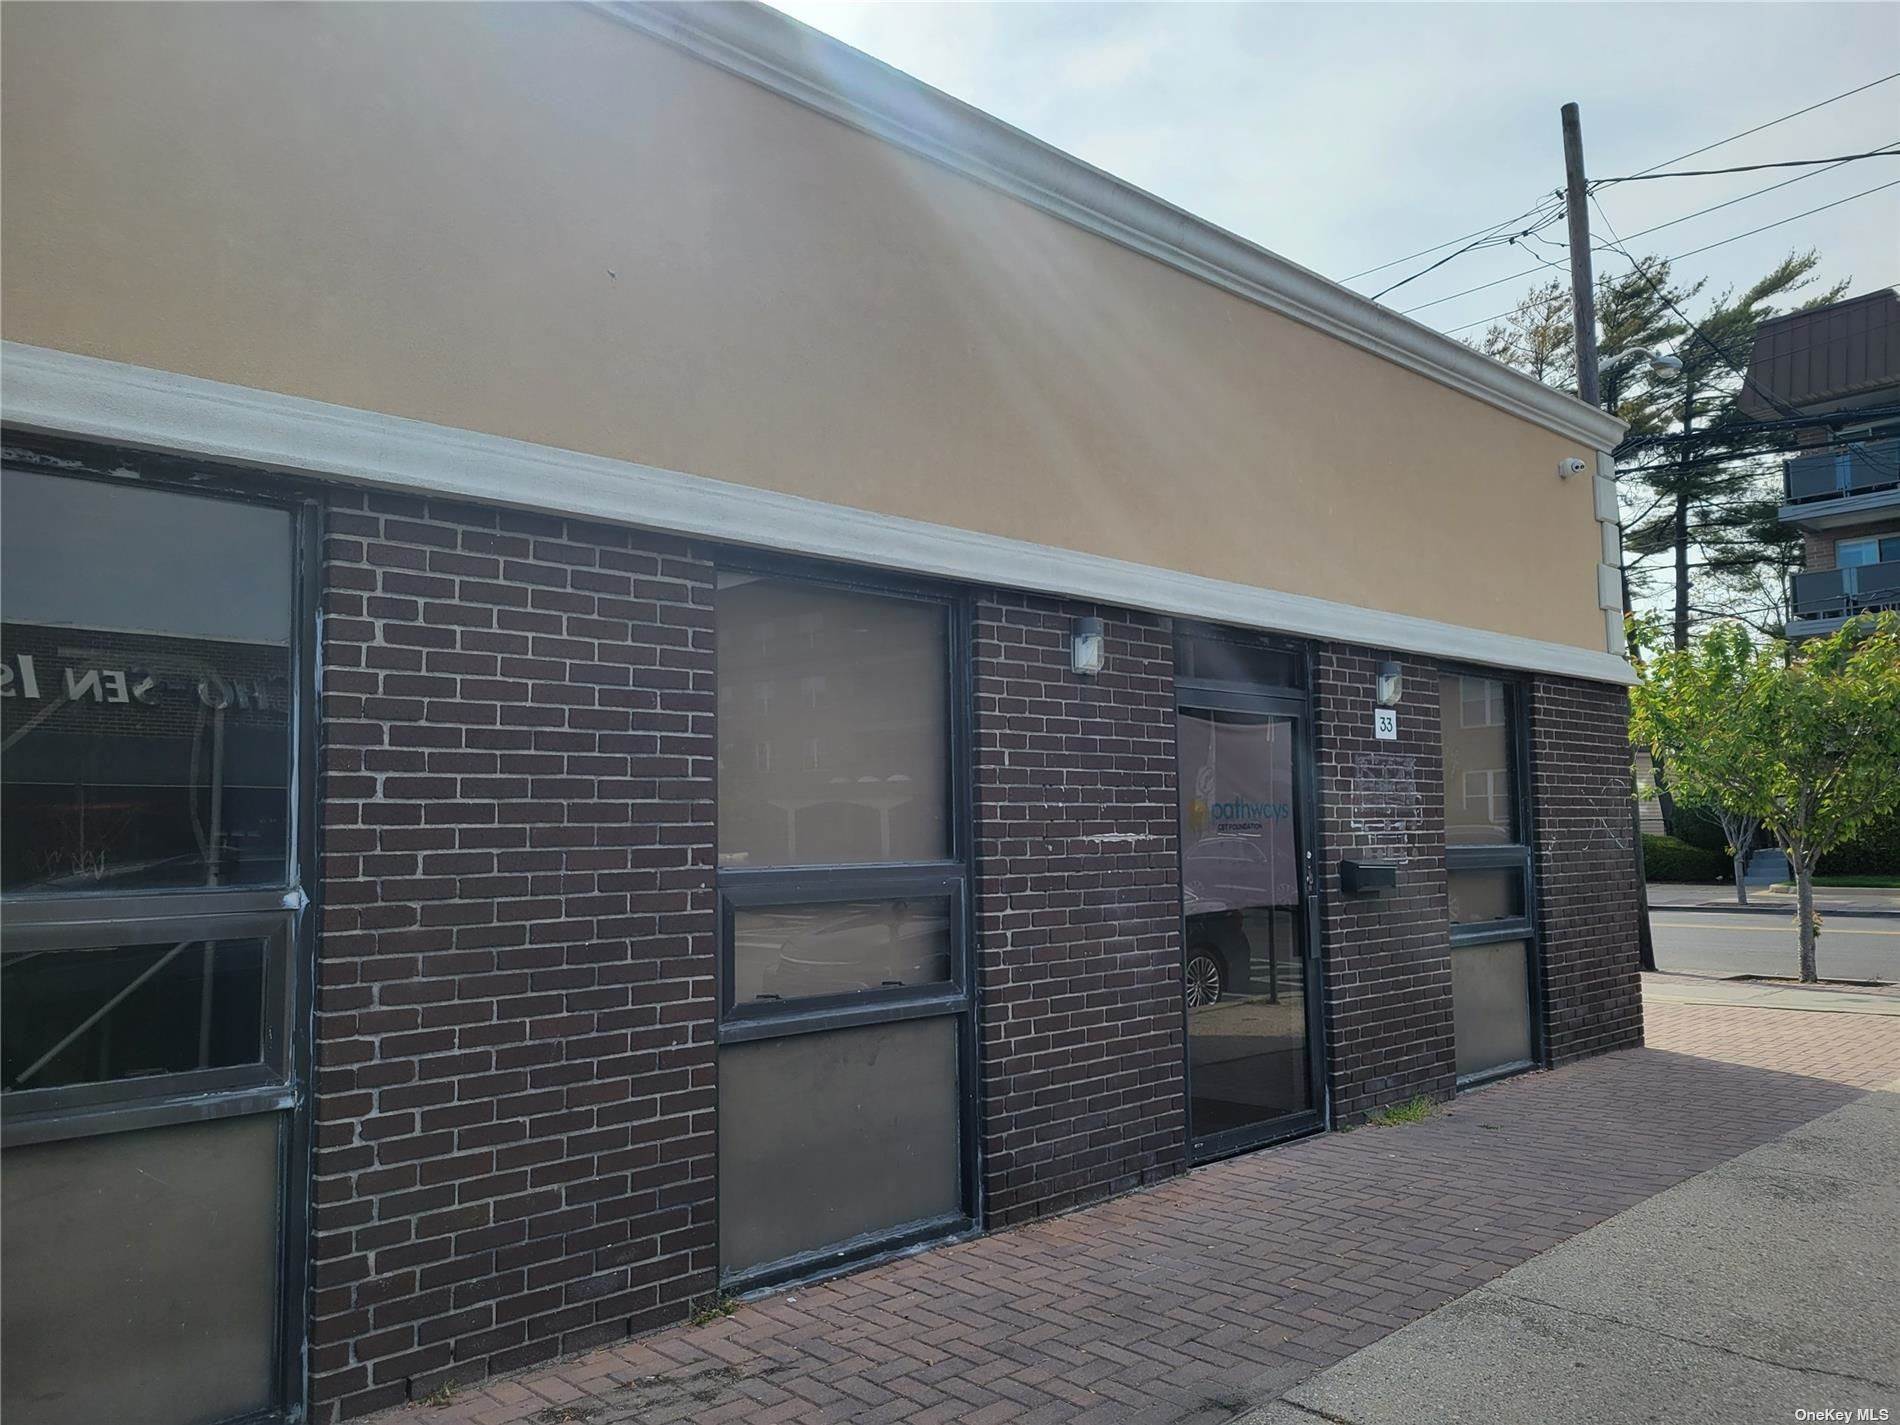 Commercial الساعة 33 Frost Lane # 1-4 Lawrence, New York 11559 United States